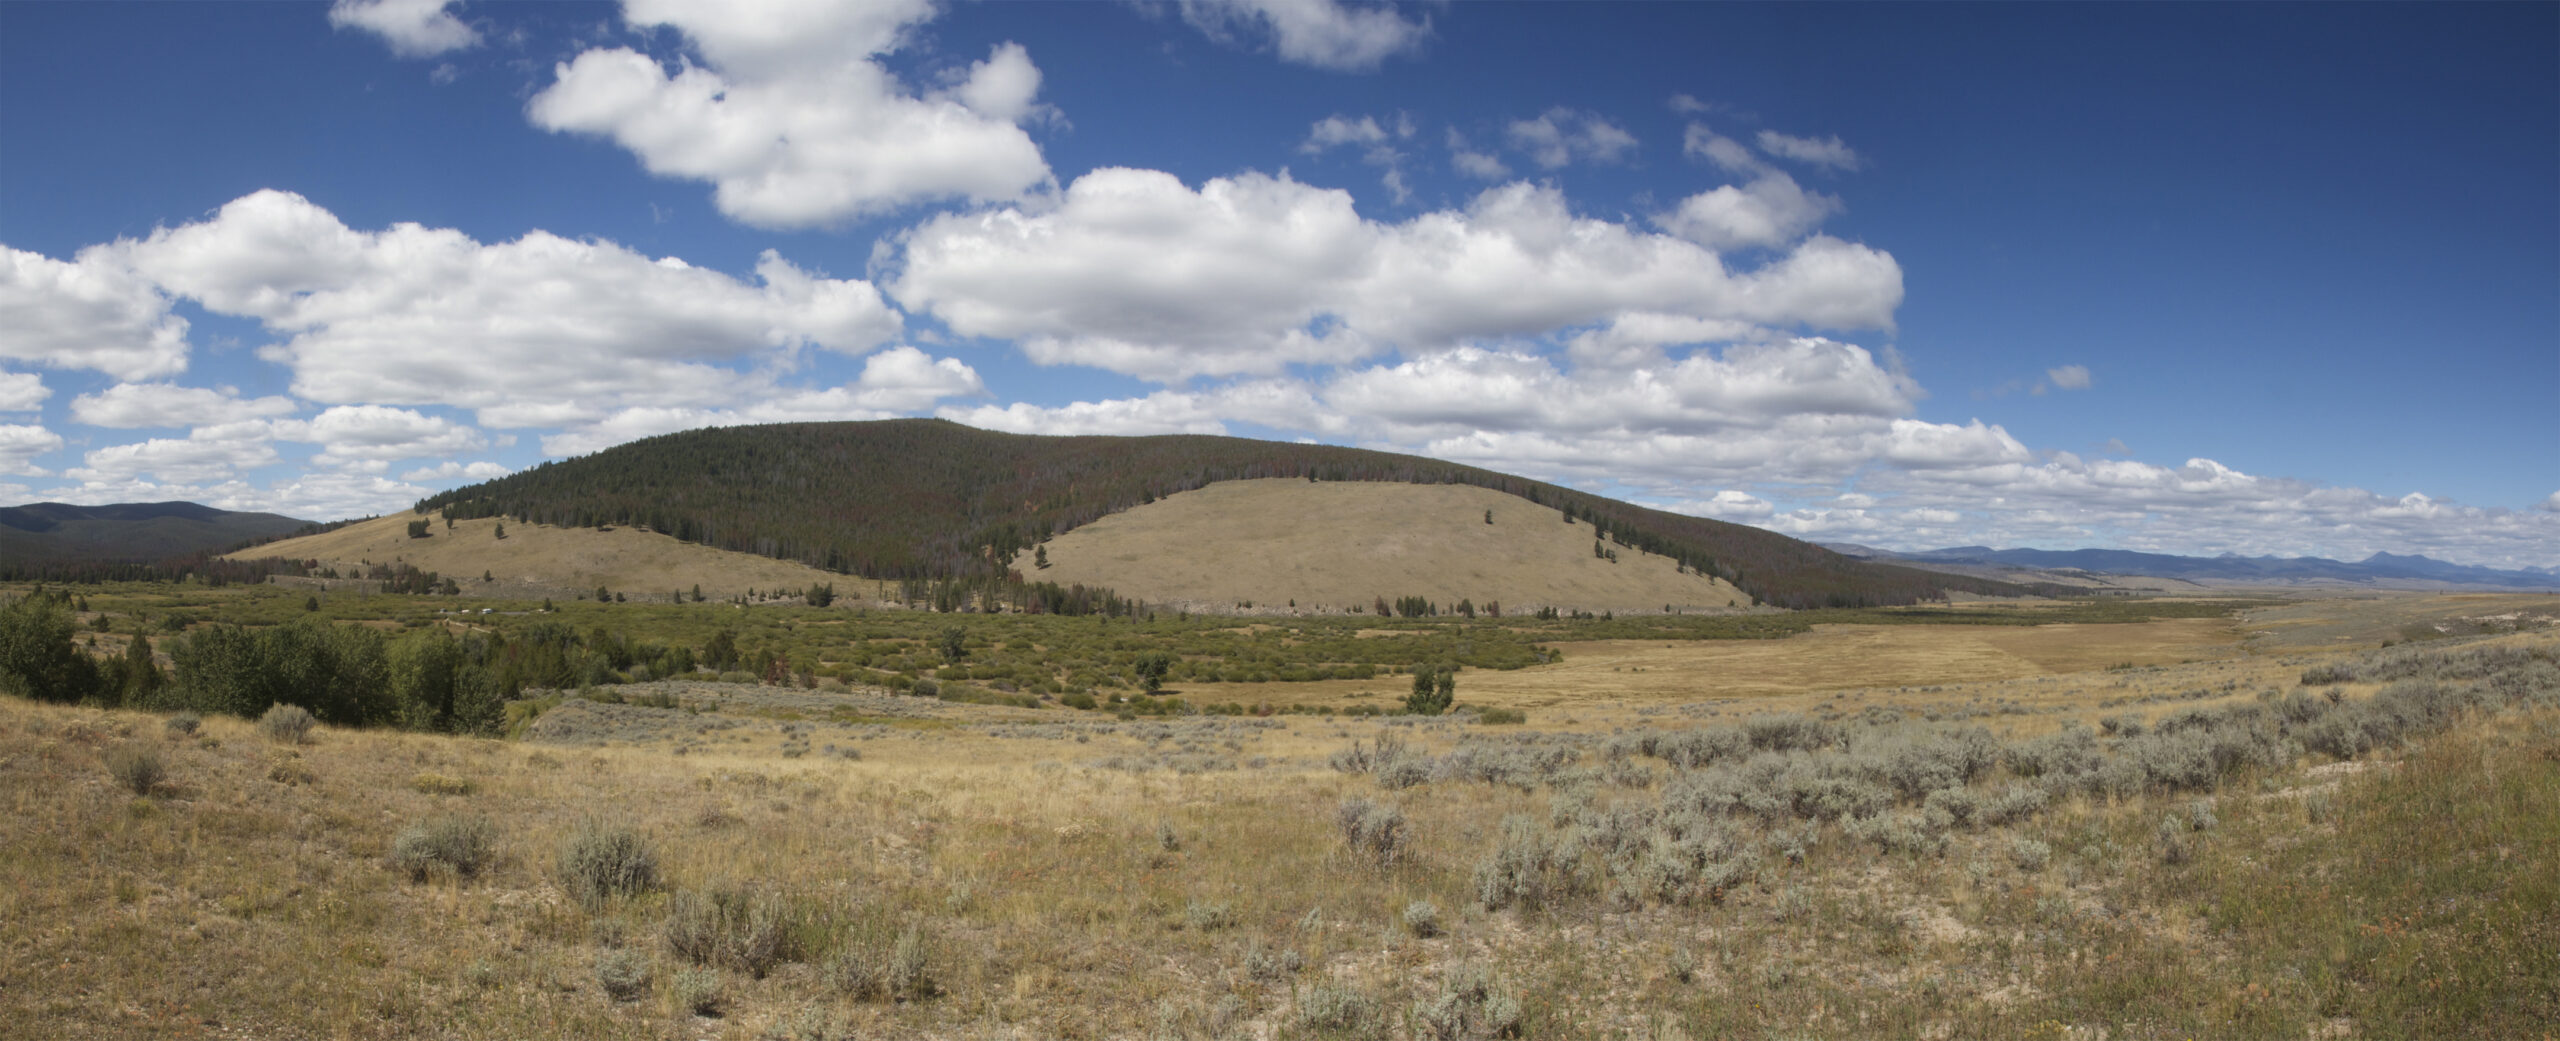 True wide panorama of the Big Hole Battlefield in Montana, part of the Nez Perce National Historic Park,